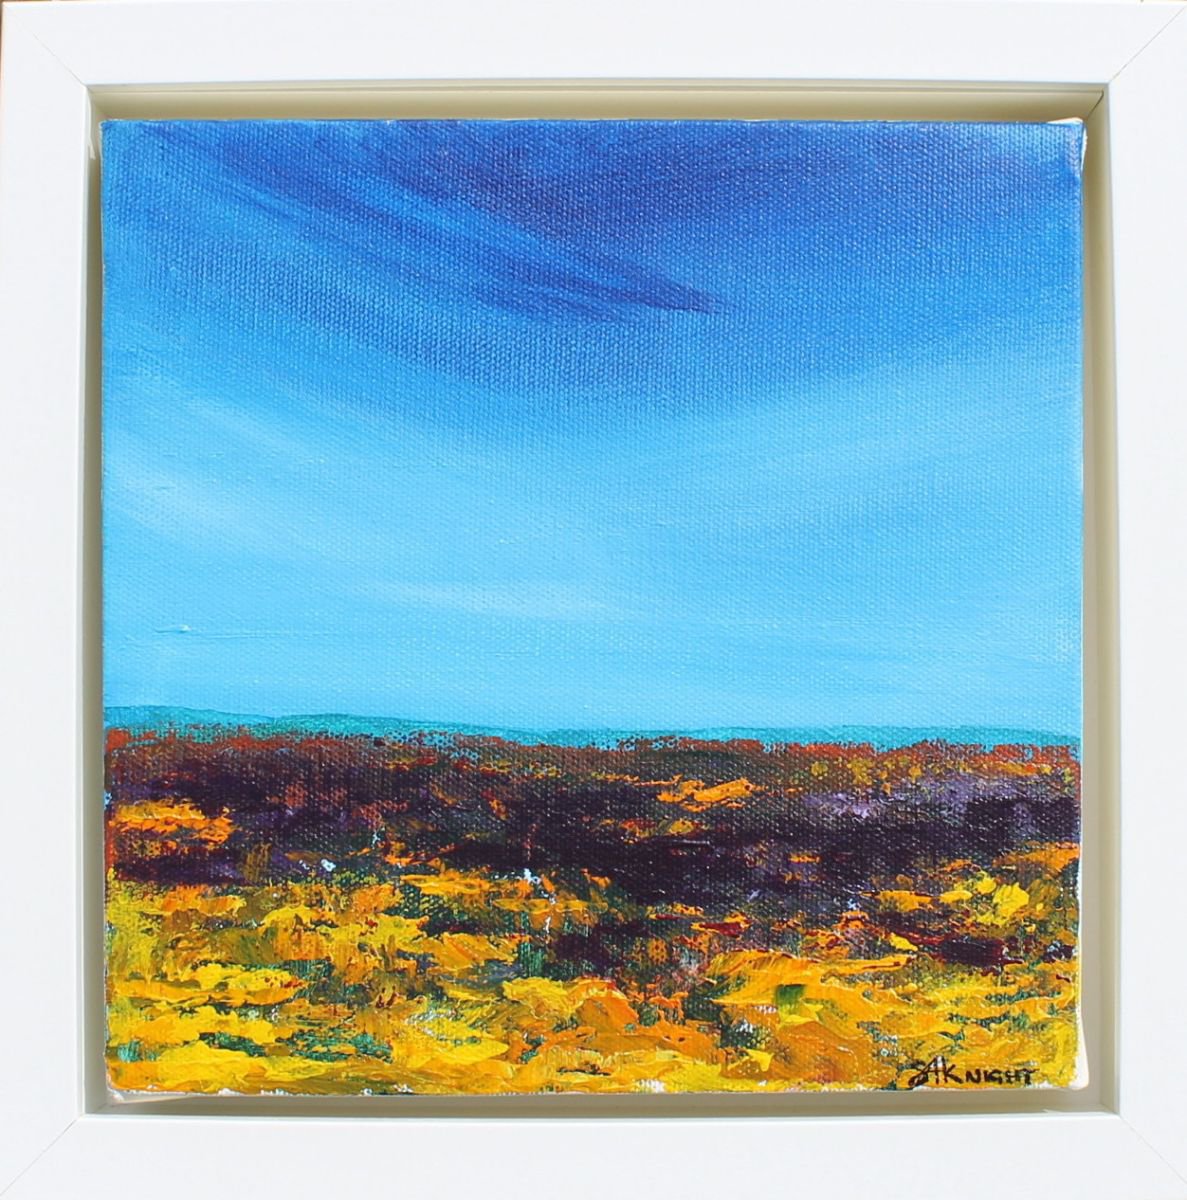 Blue Sky over the Moors by Sue Knight